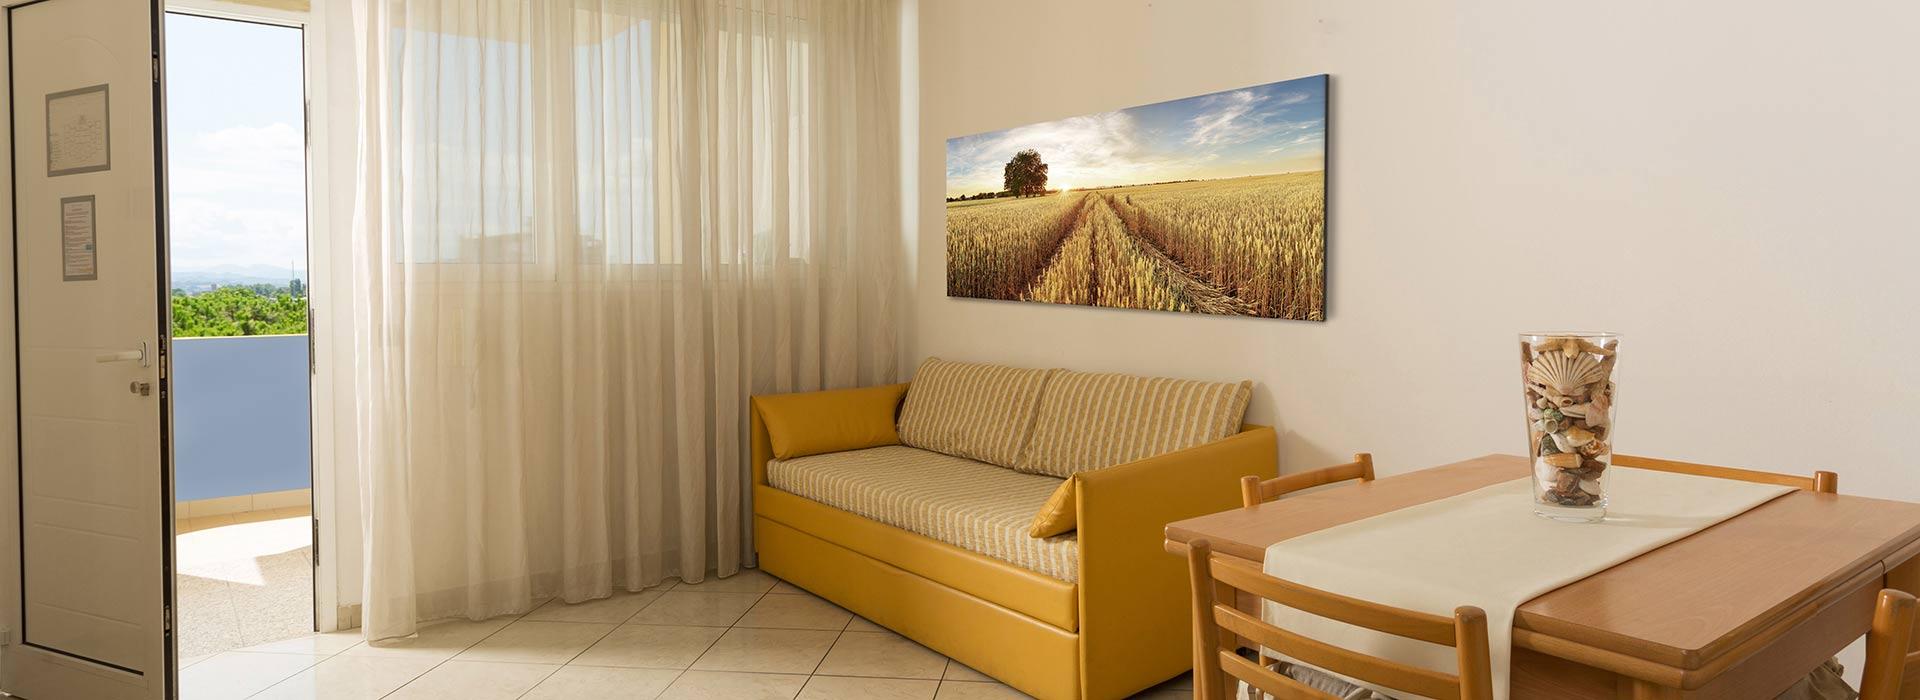 hotelpiccadilly it 62-5000first-you-book-in-rimini-first-you-save-10-on-your-holiday 001